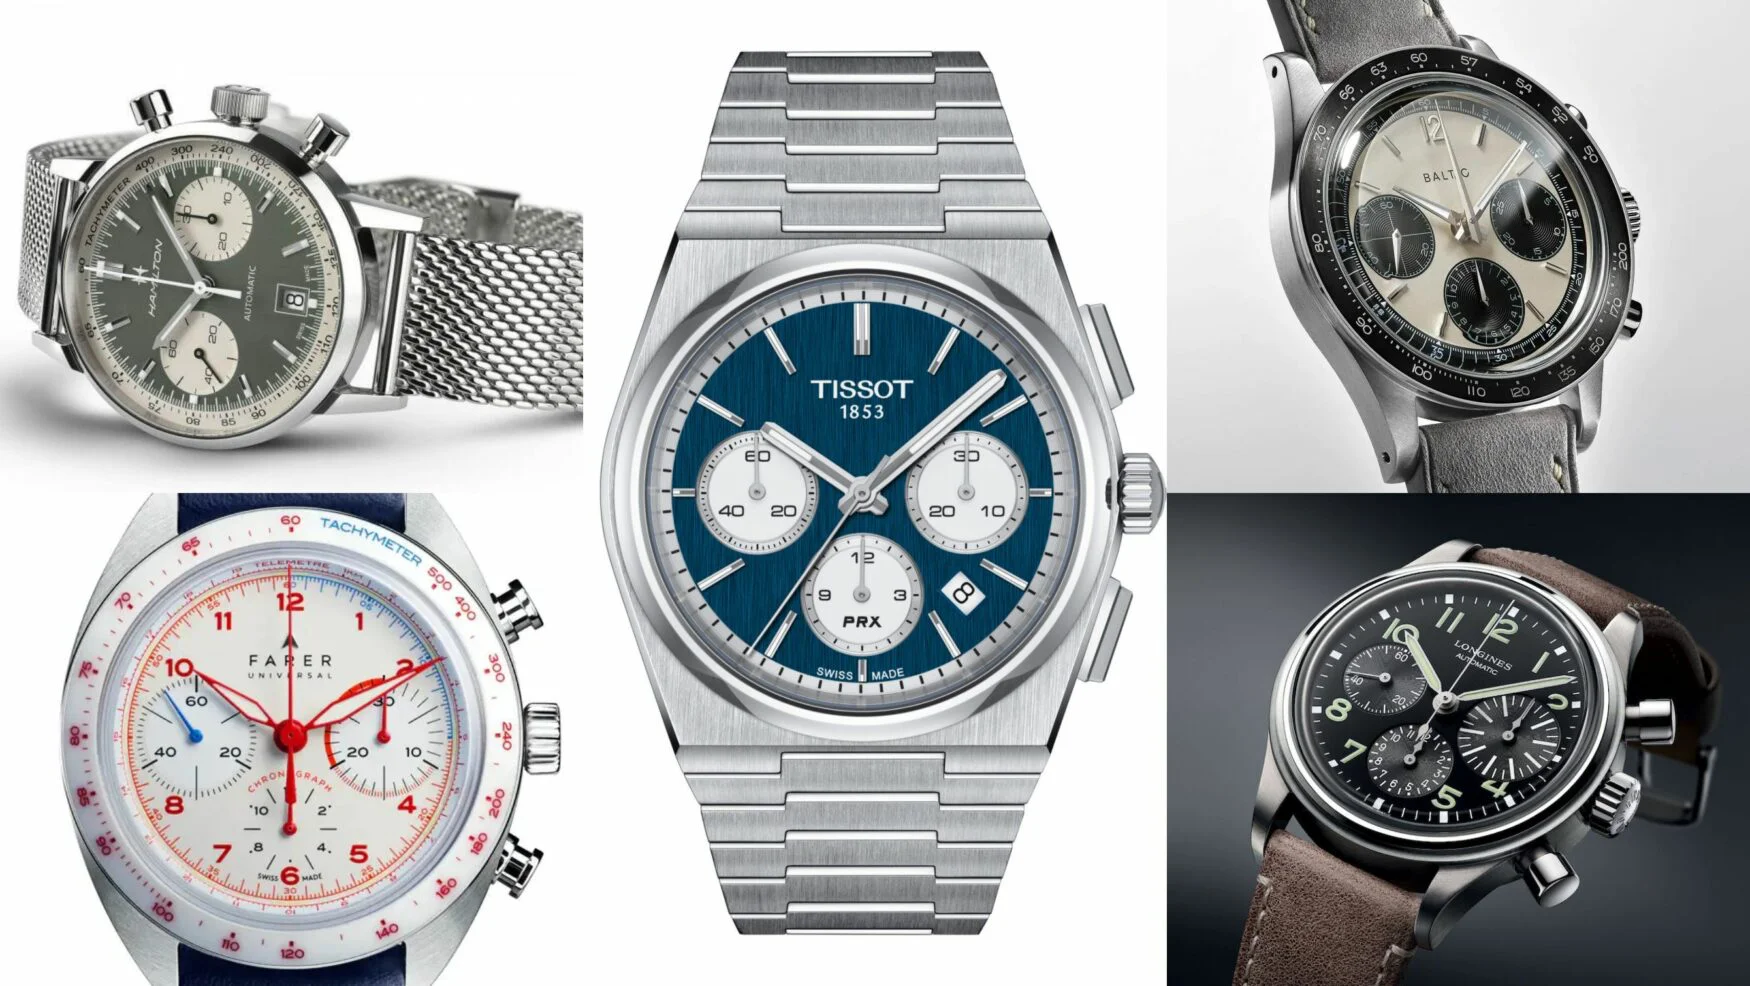 Time+Tide's The Black List: The best black watches in recent memory